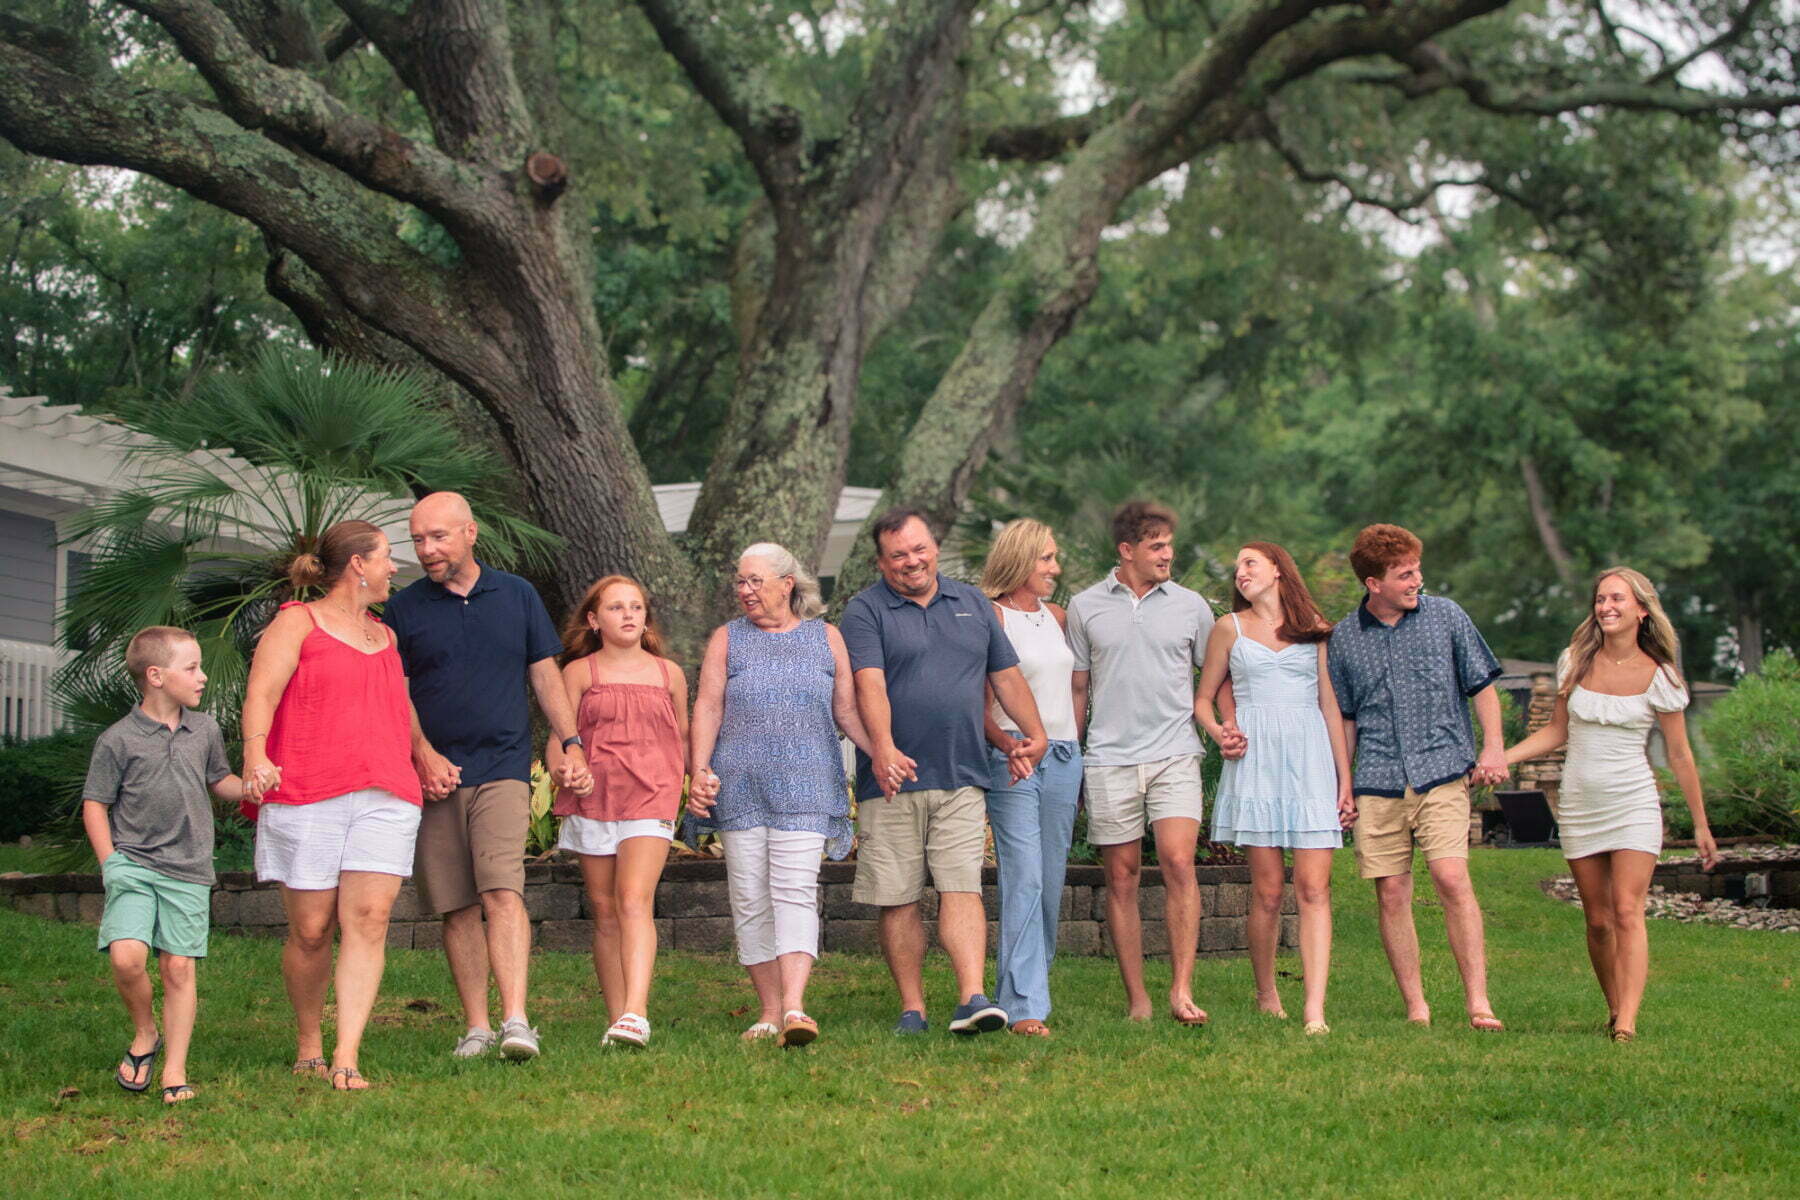 Sunset Beach, NC extended family lifestyle photography session under oak trees.